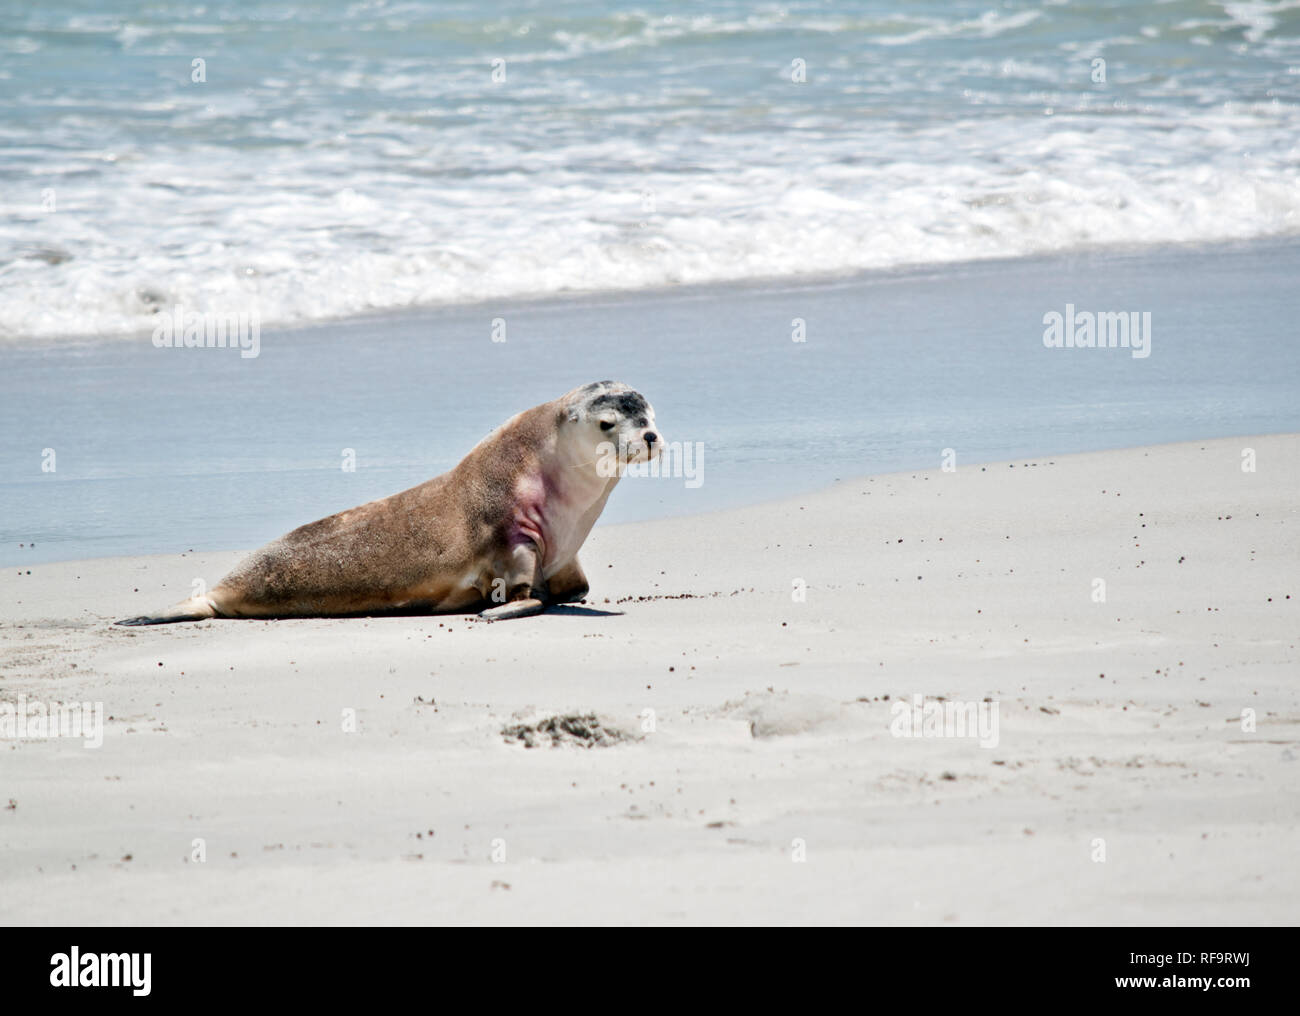 the sea lion has just come out of the water and is walking on the sand at Seal Bay, Australia Stock Photo